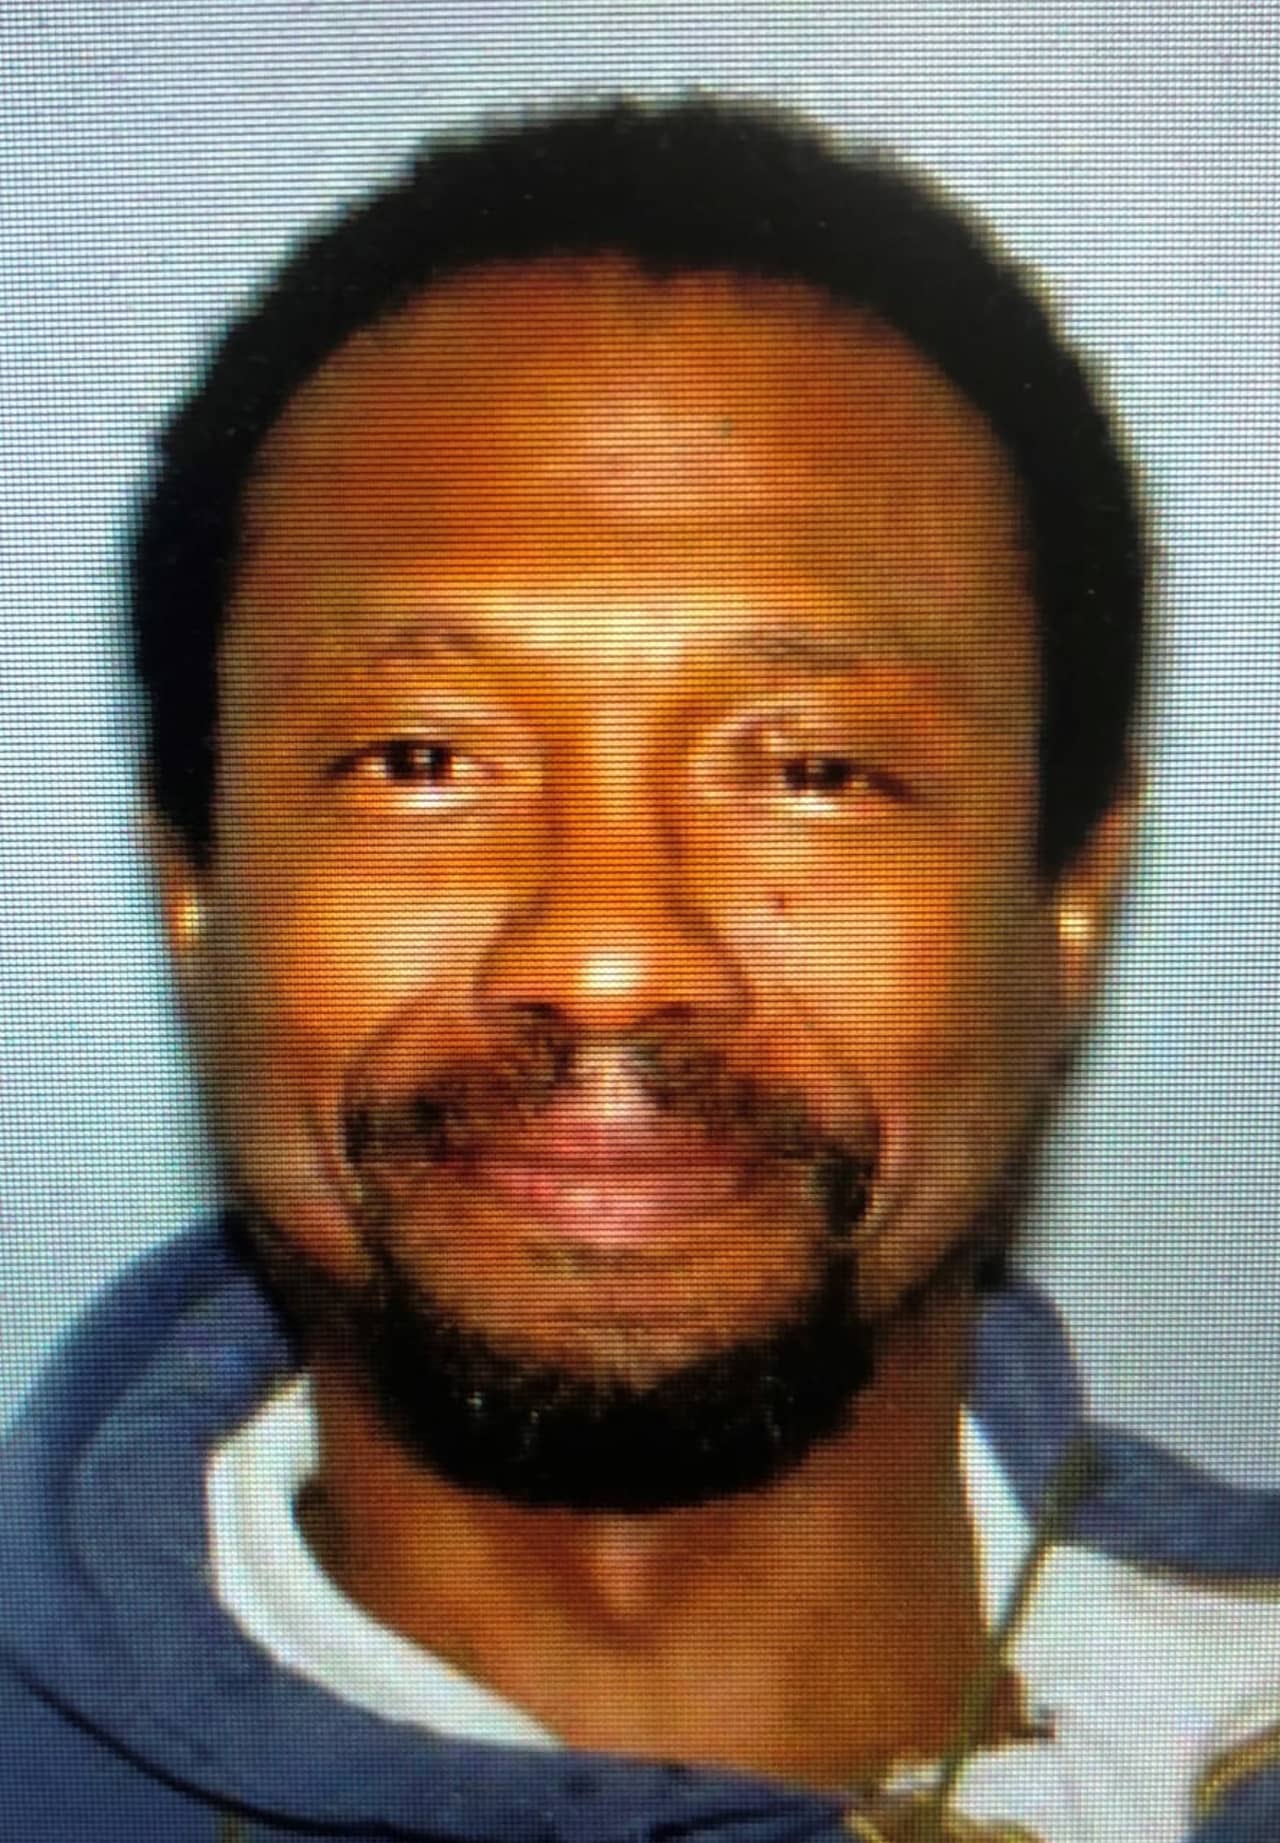 Perry Brown was last seen leaving the Northport VA Hospital on Thursday, Dec. 3 at approximately 3 p.m.